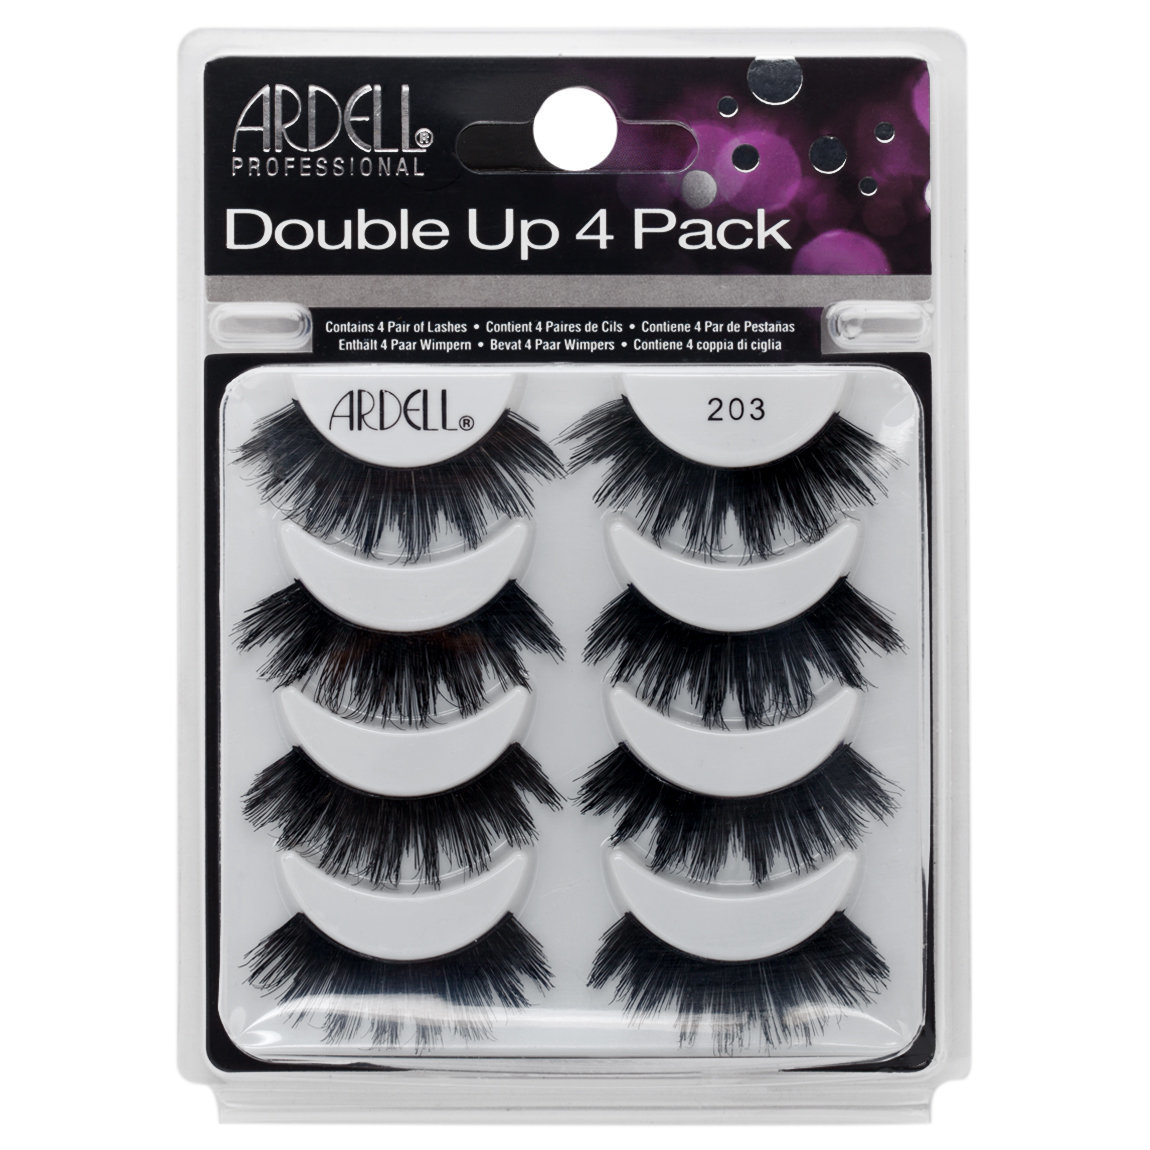 Ardell Double Up 4 Pack  203 alternative view 1.